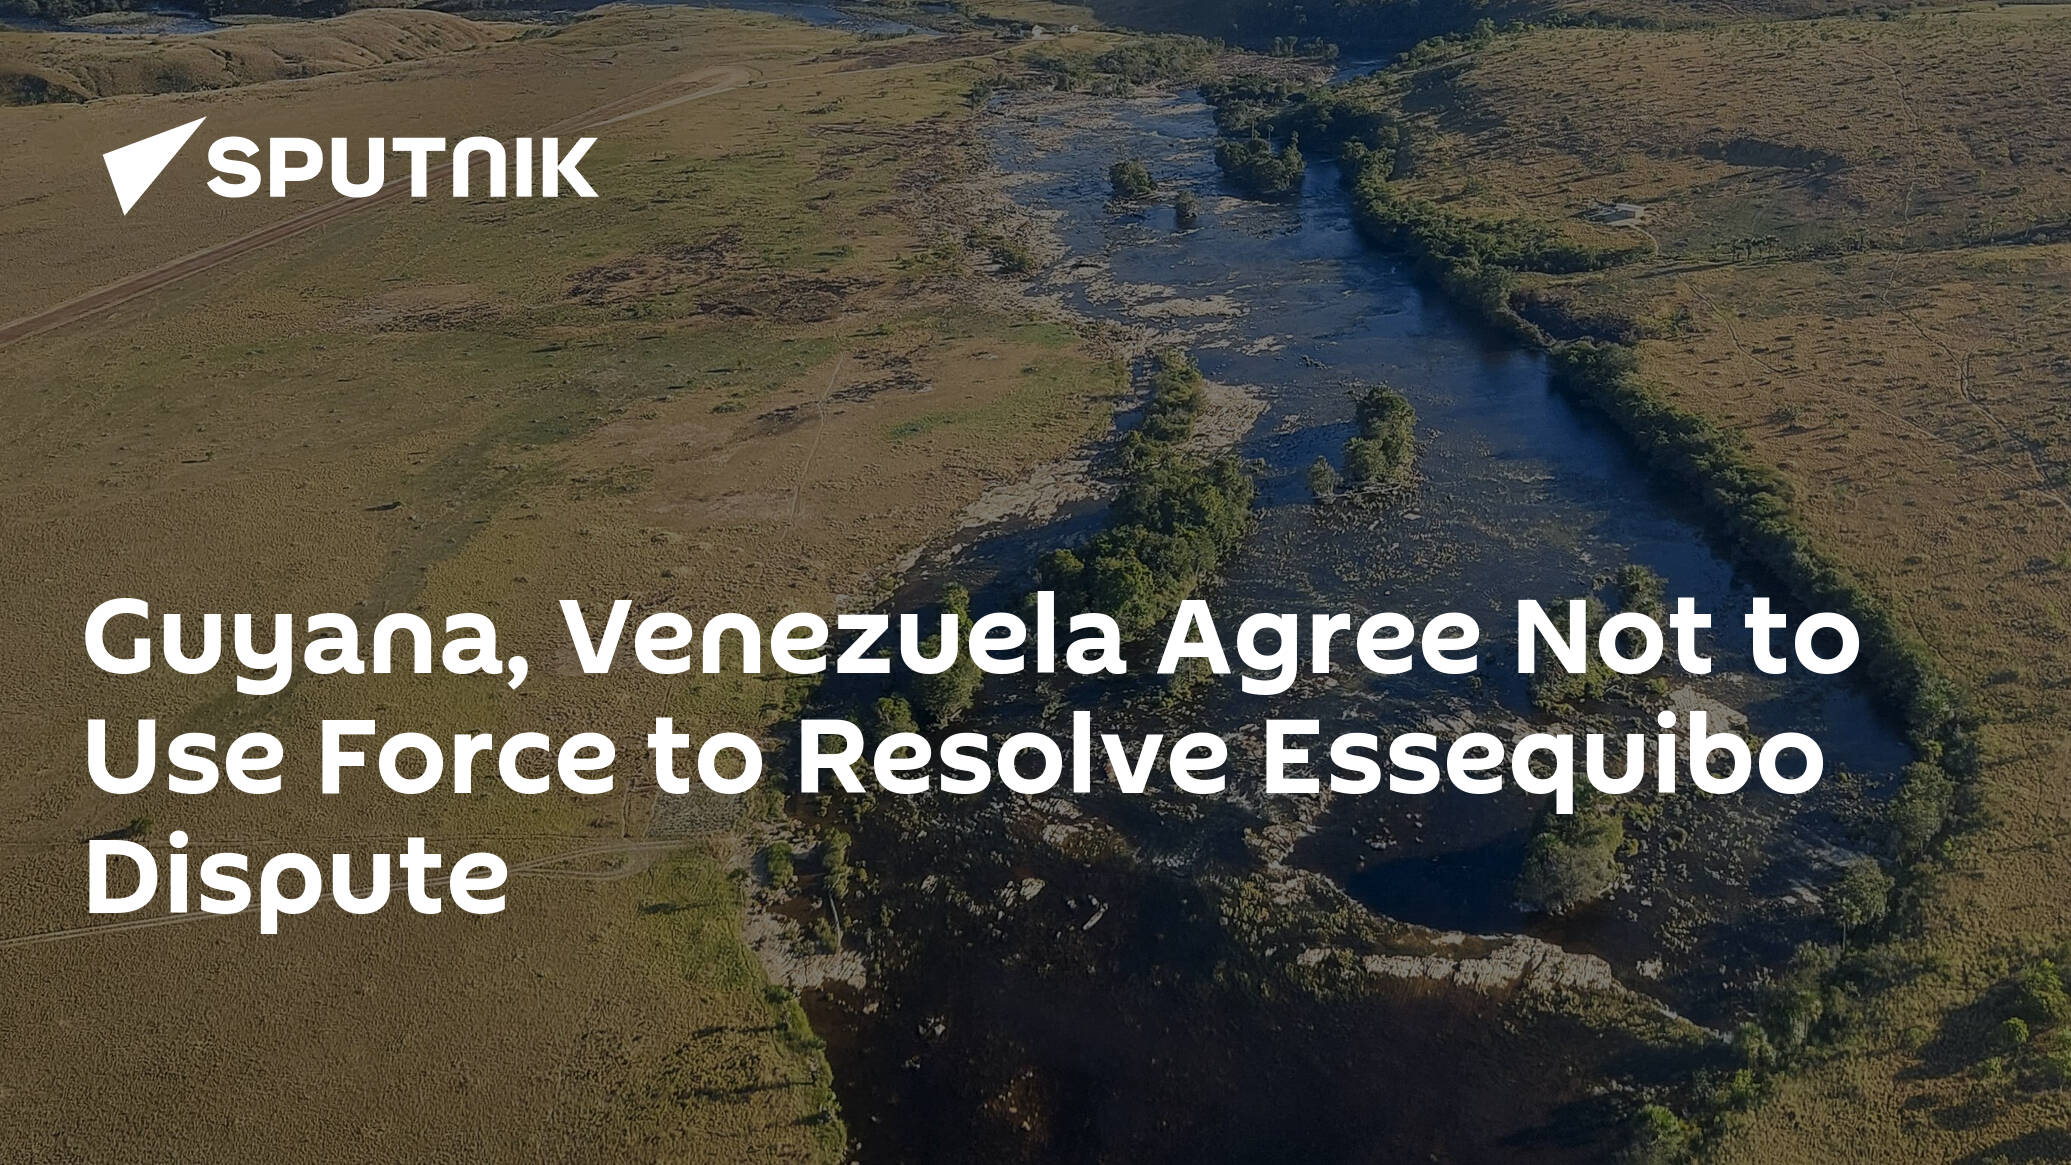 Guyana, Venezuela Agree Not to Use Force to Resolve Essequibo Dispute